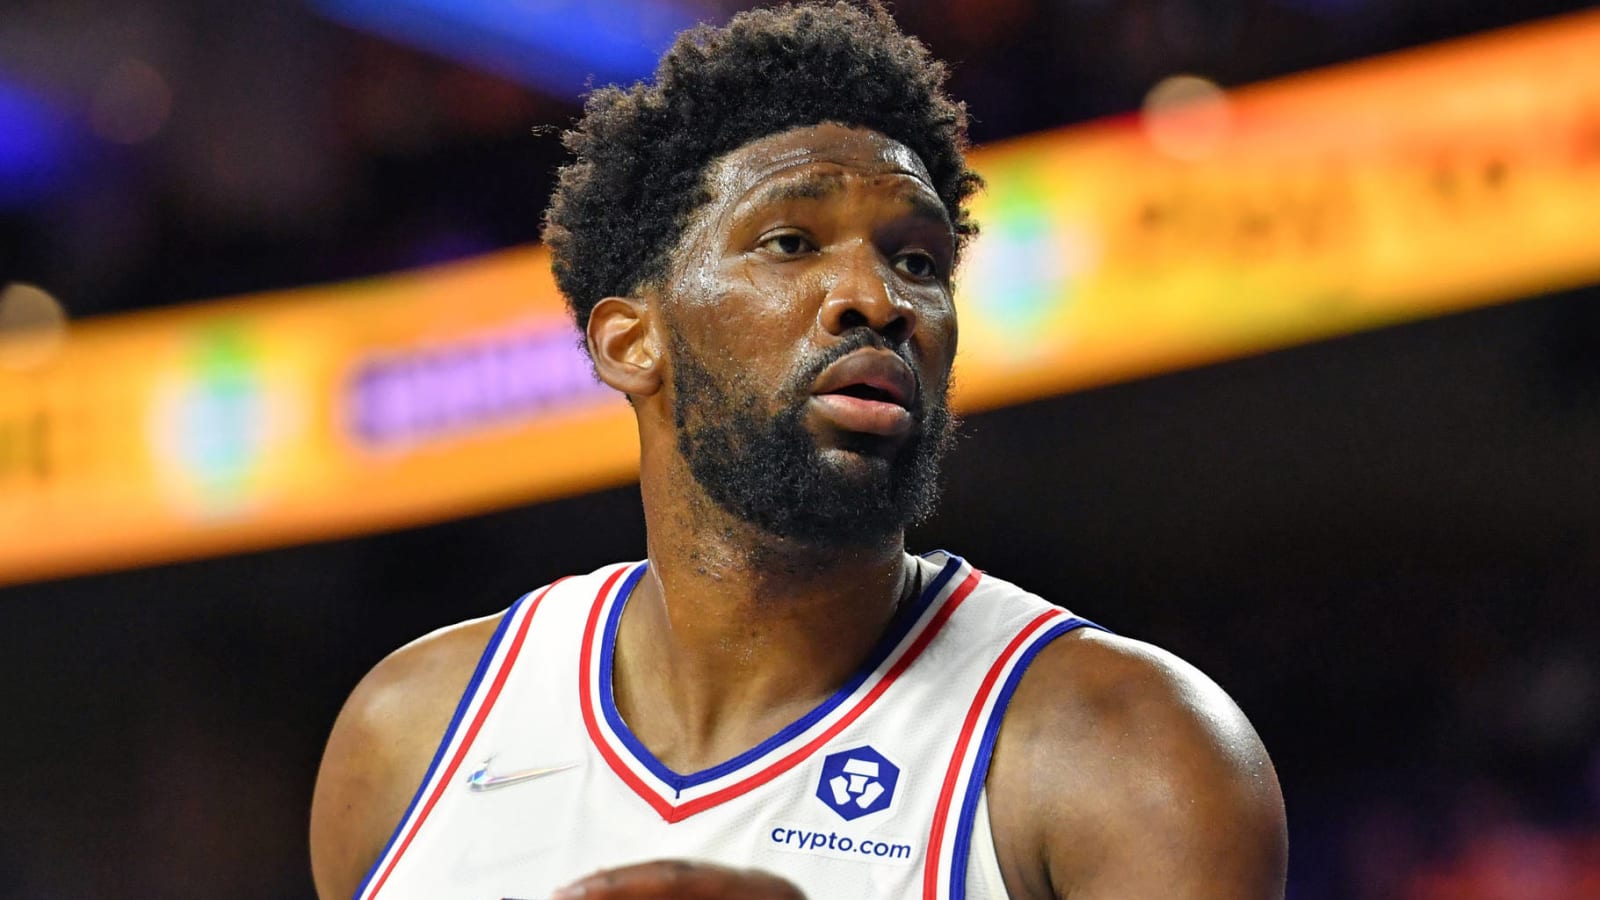 Embiid has harsh comments for Simmons after suspension